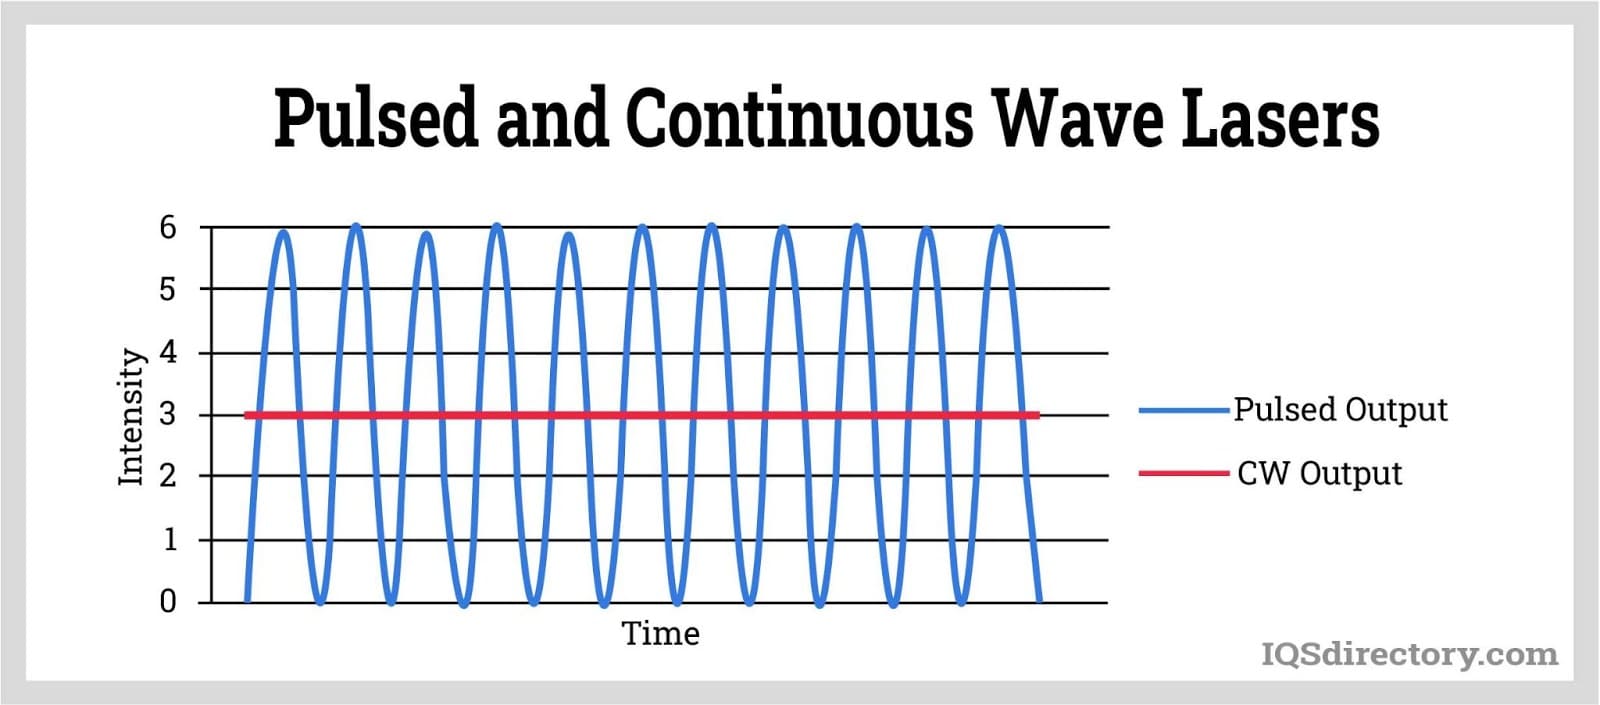 Pulsed and Continuous Wave Lasers